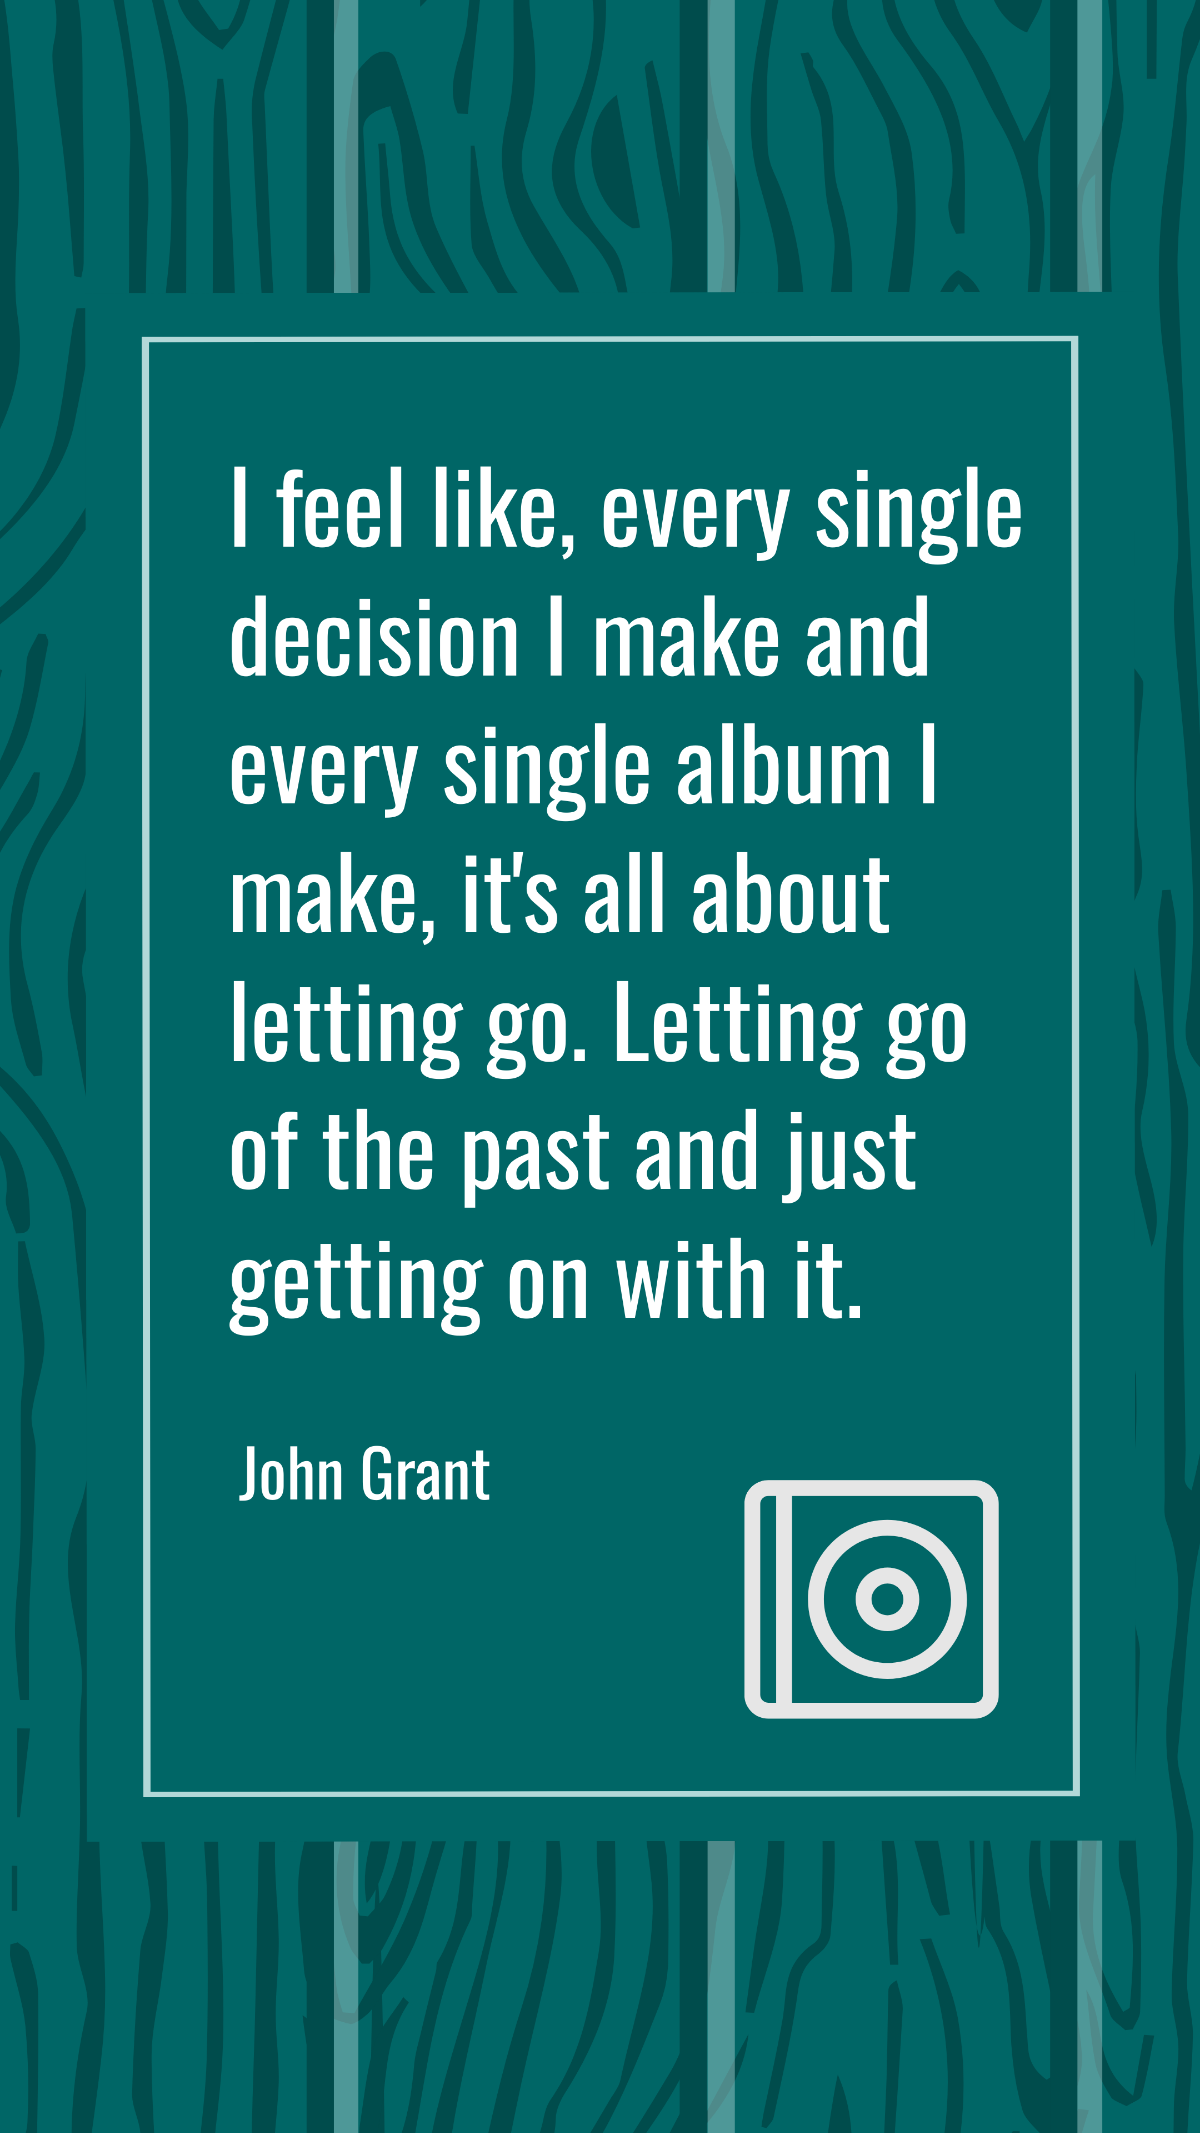 Free John Grant - I feel like, every single decision I make and every single album I make, it's all about letting go. Letting go of the past and just getting on with it. Template